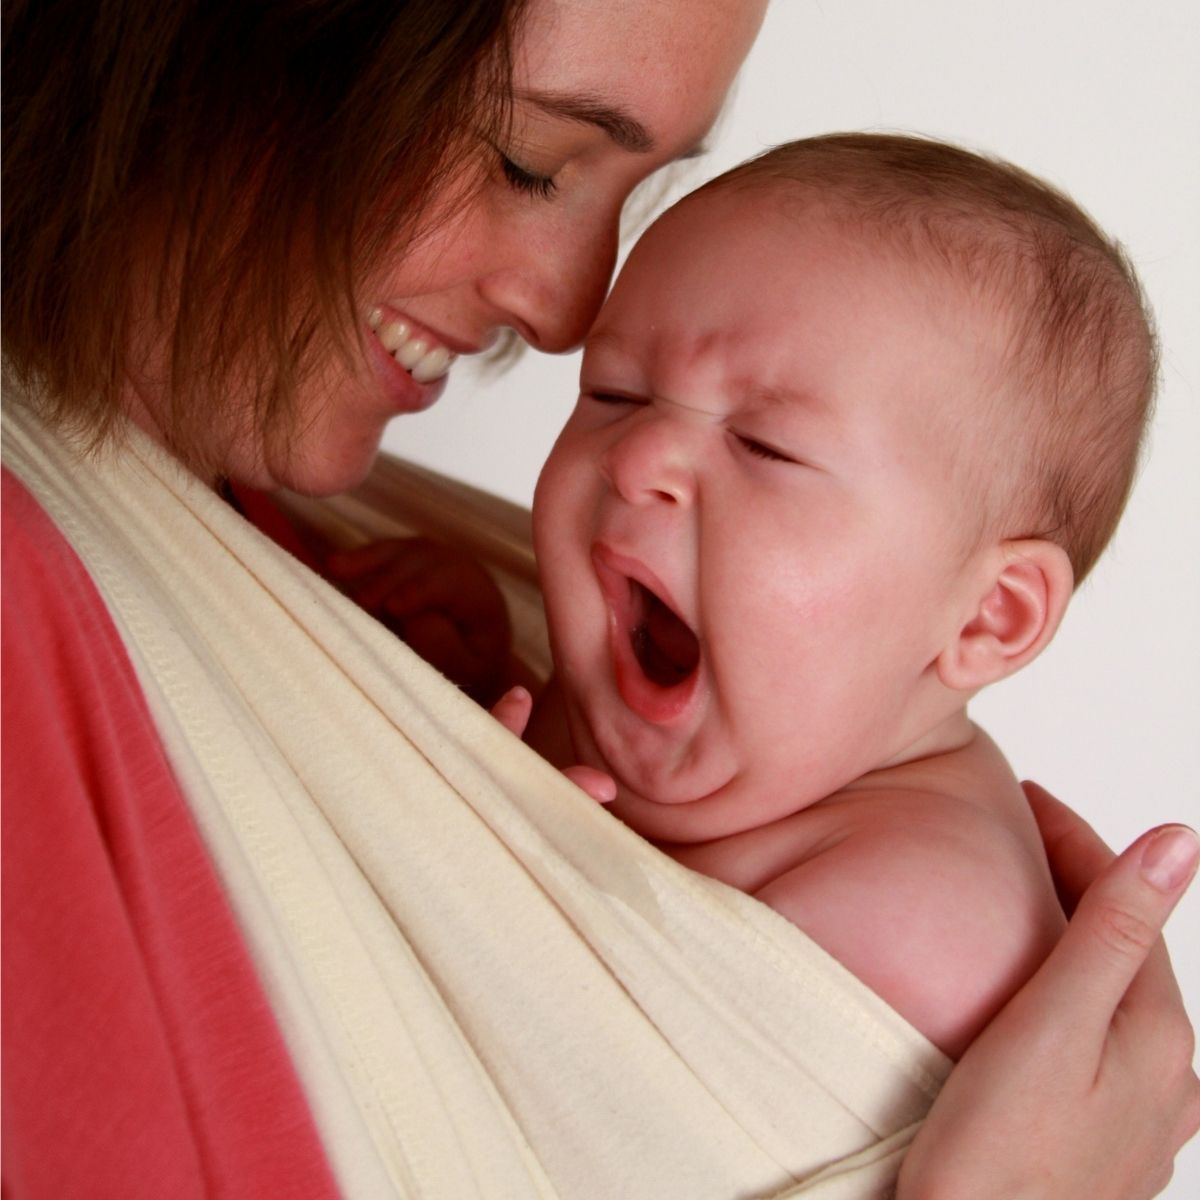 Yawning baby in a wrap on his smiling mom's chest